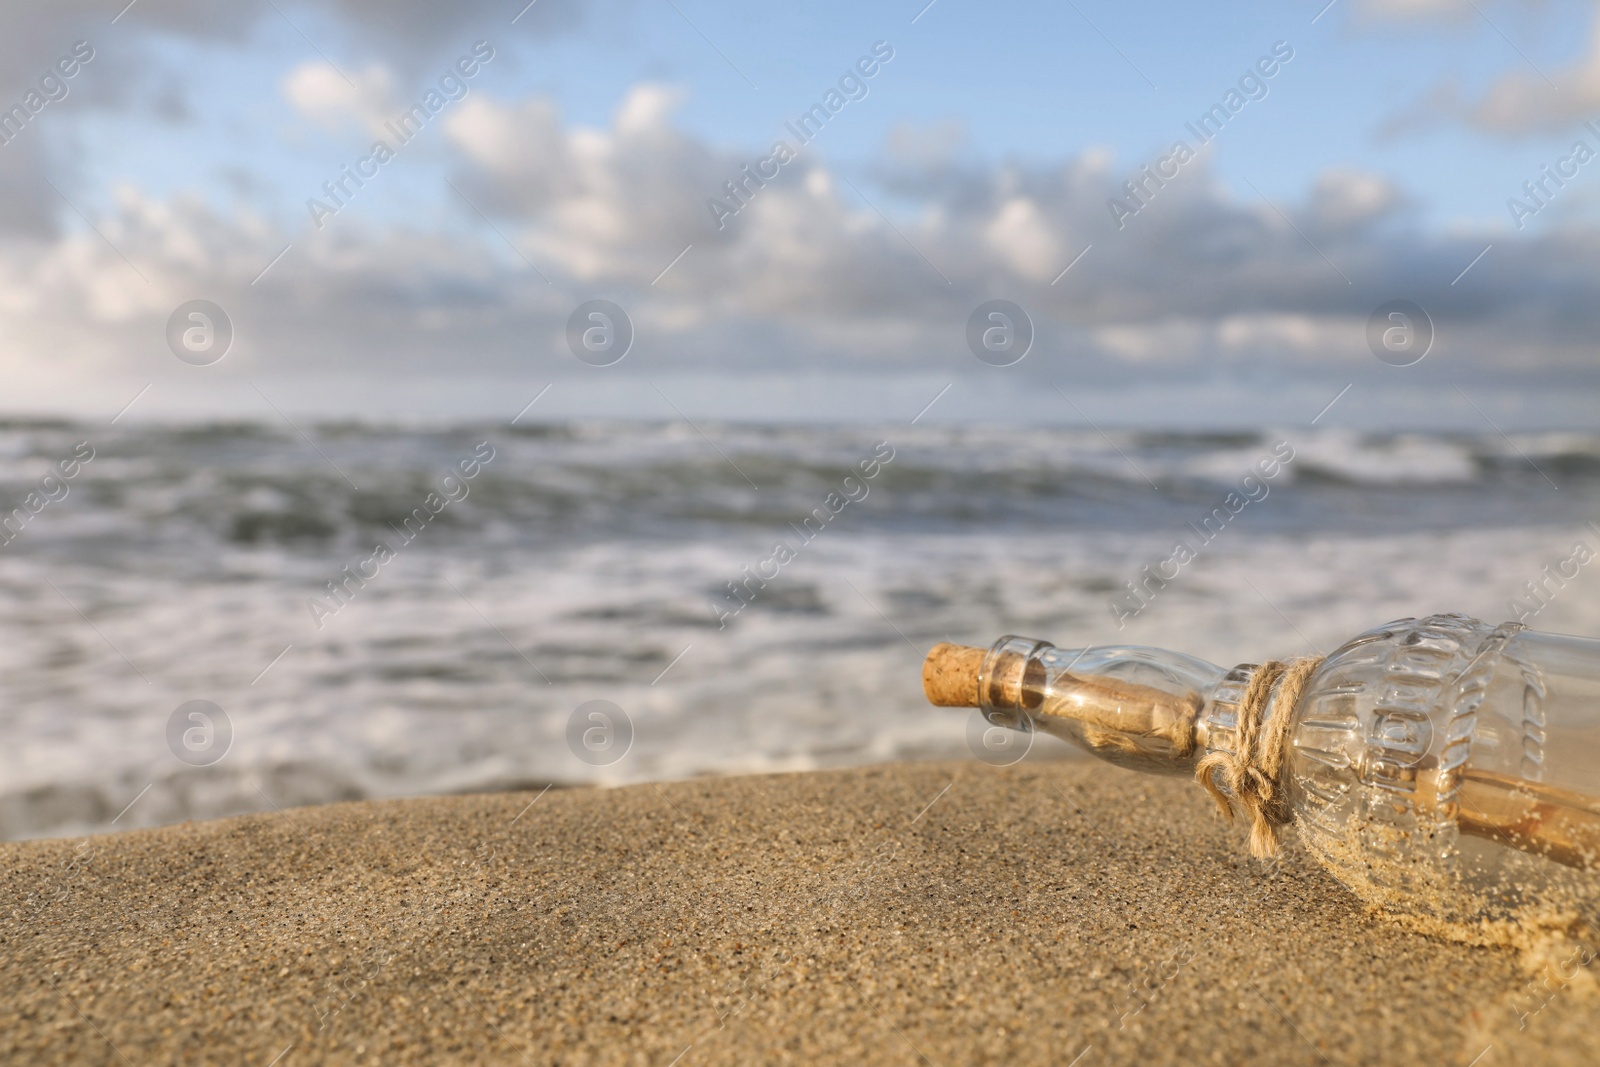 Photo of SOS message in glass bottle on sand near sea, closeup. Space for text